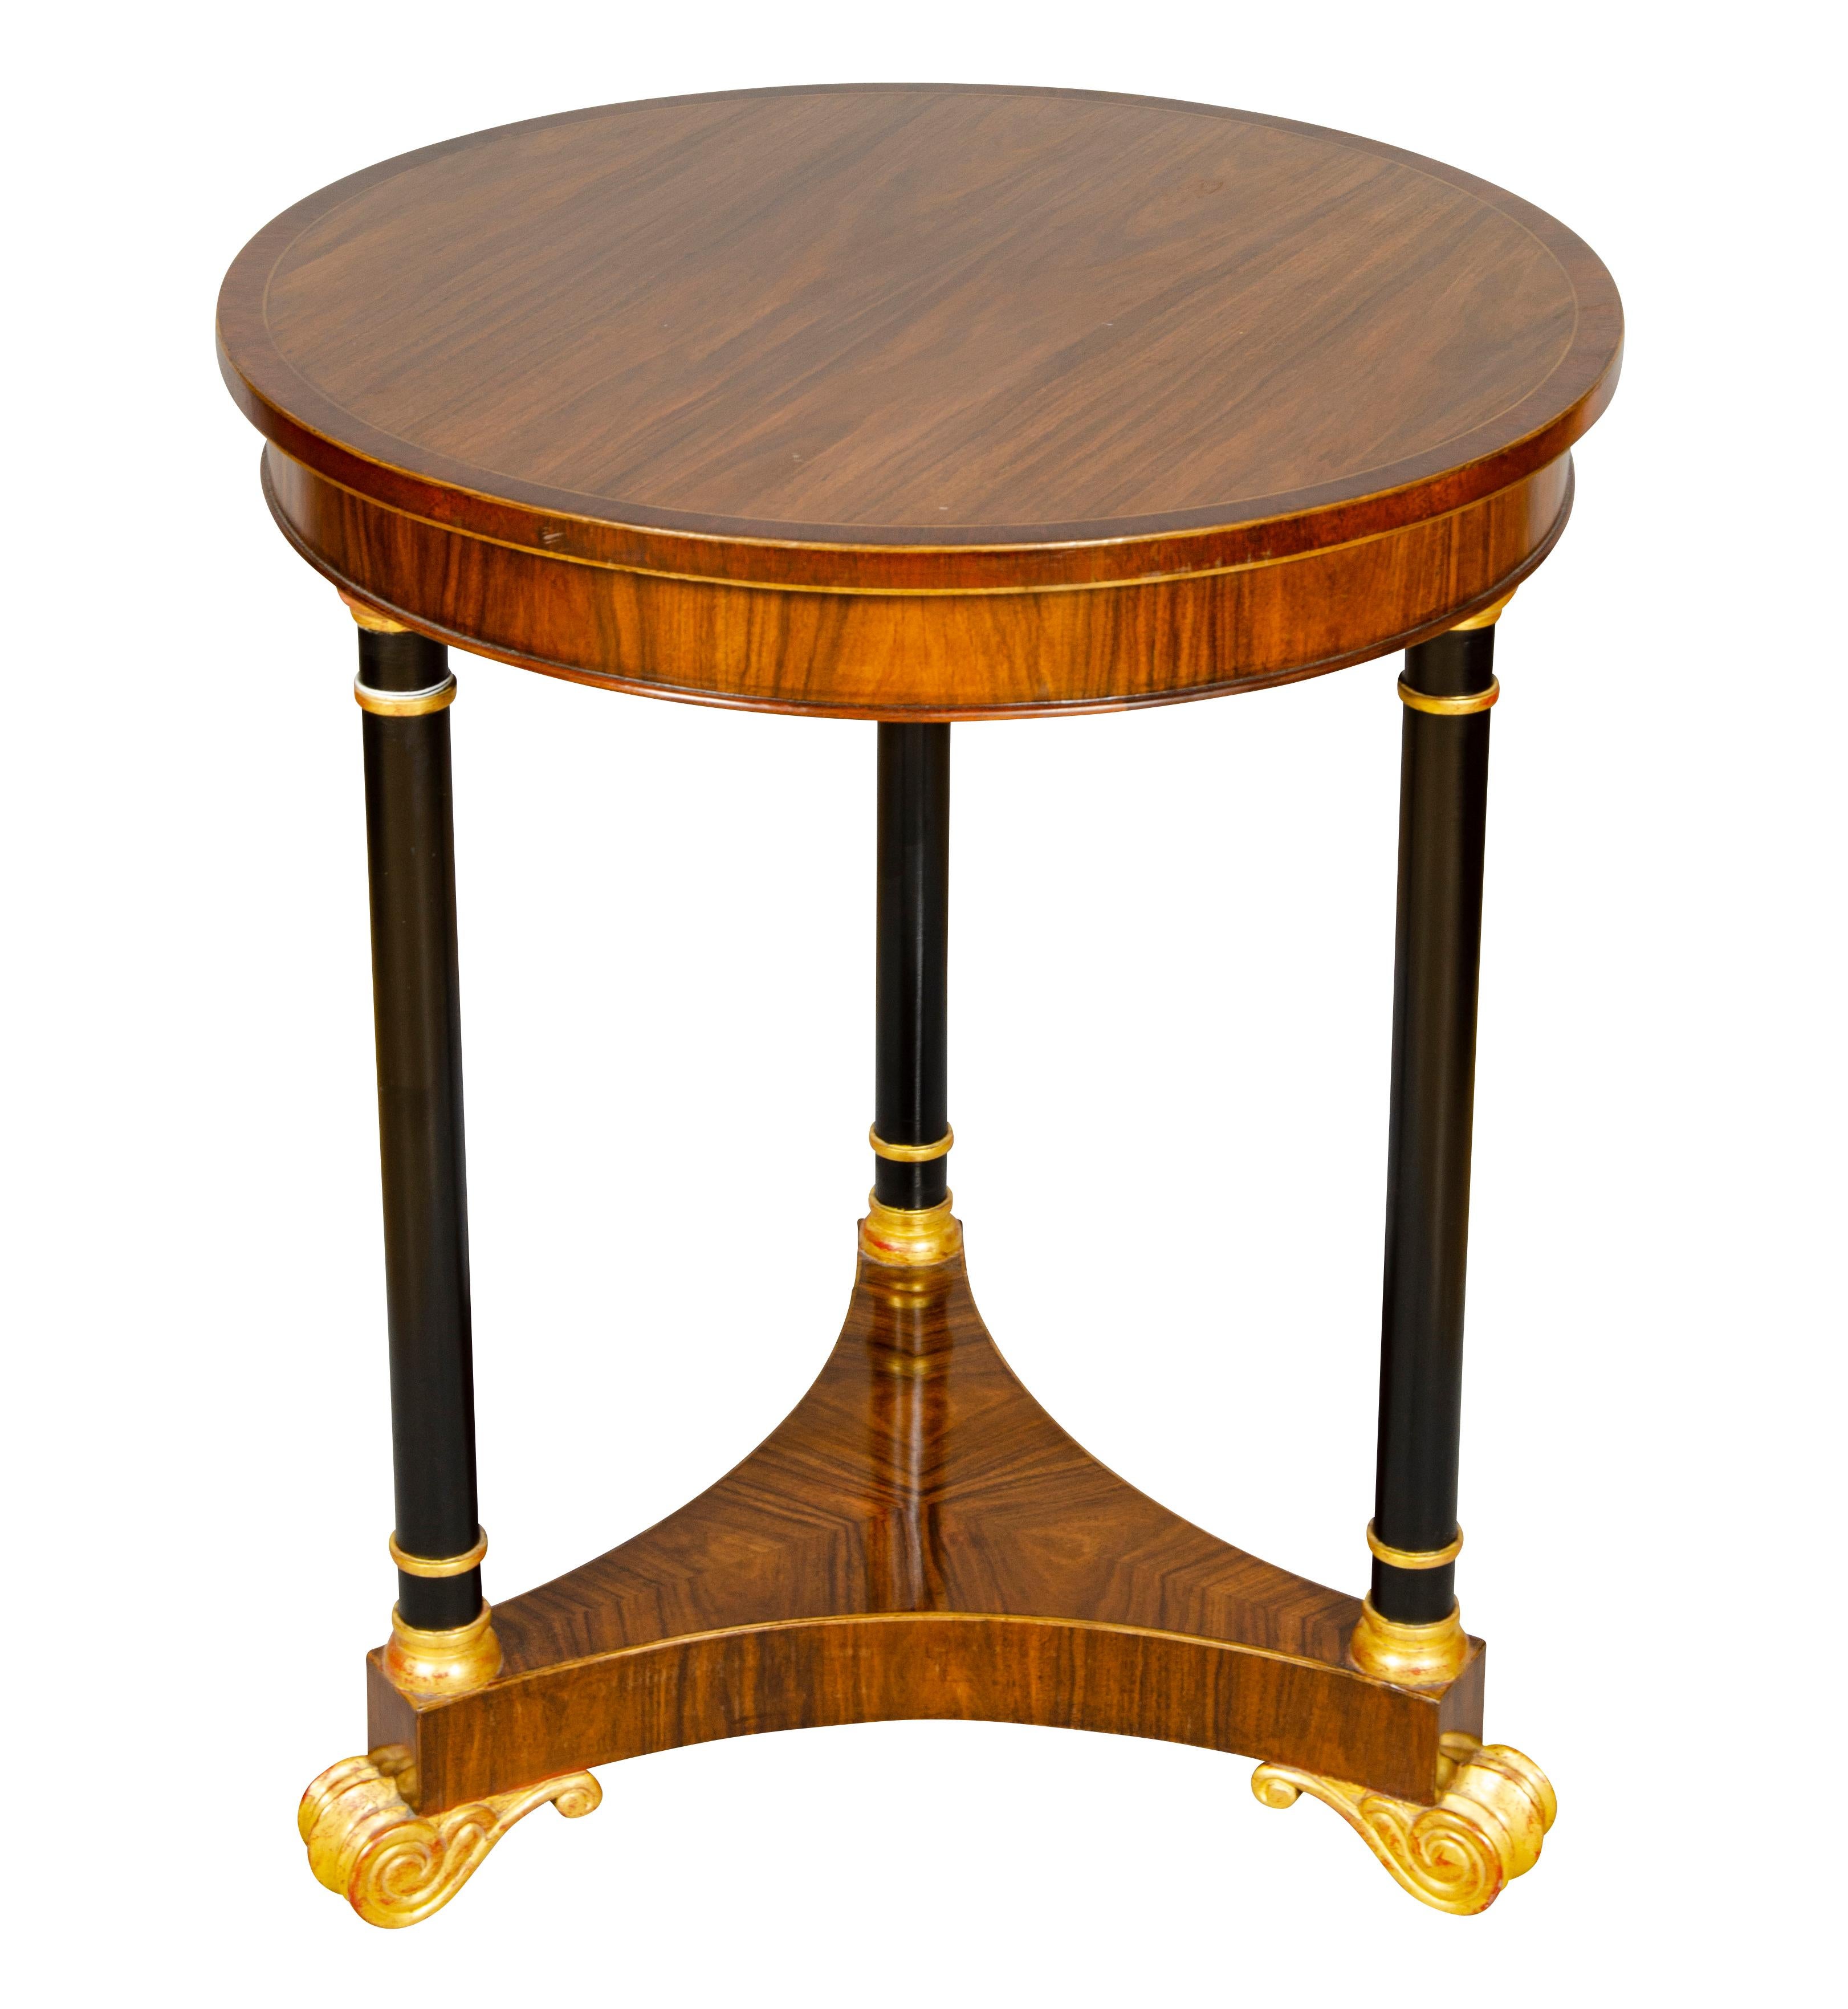 Circular banded top over a conforming frieze supported on three ebonized and gilt wood legs joined by a plinth base raised on Greek scroll feet.